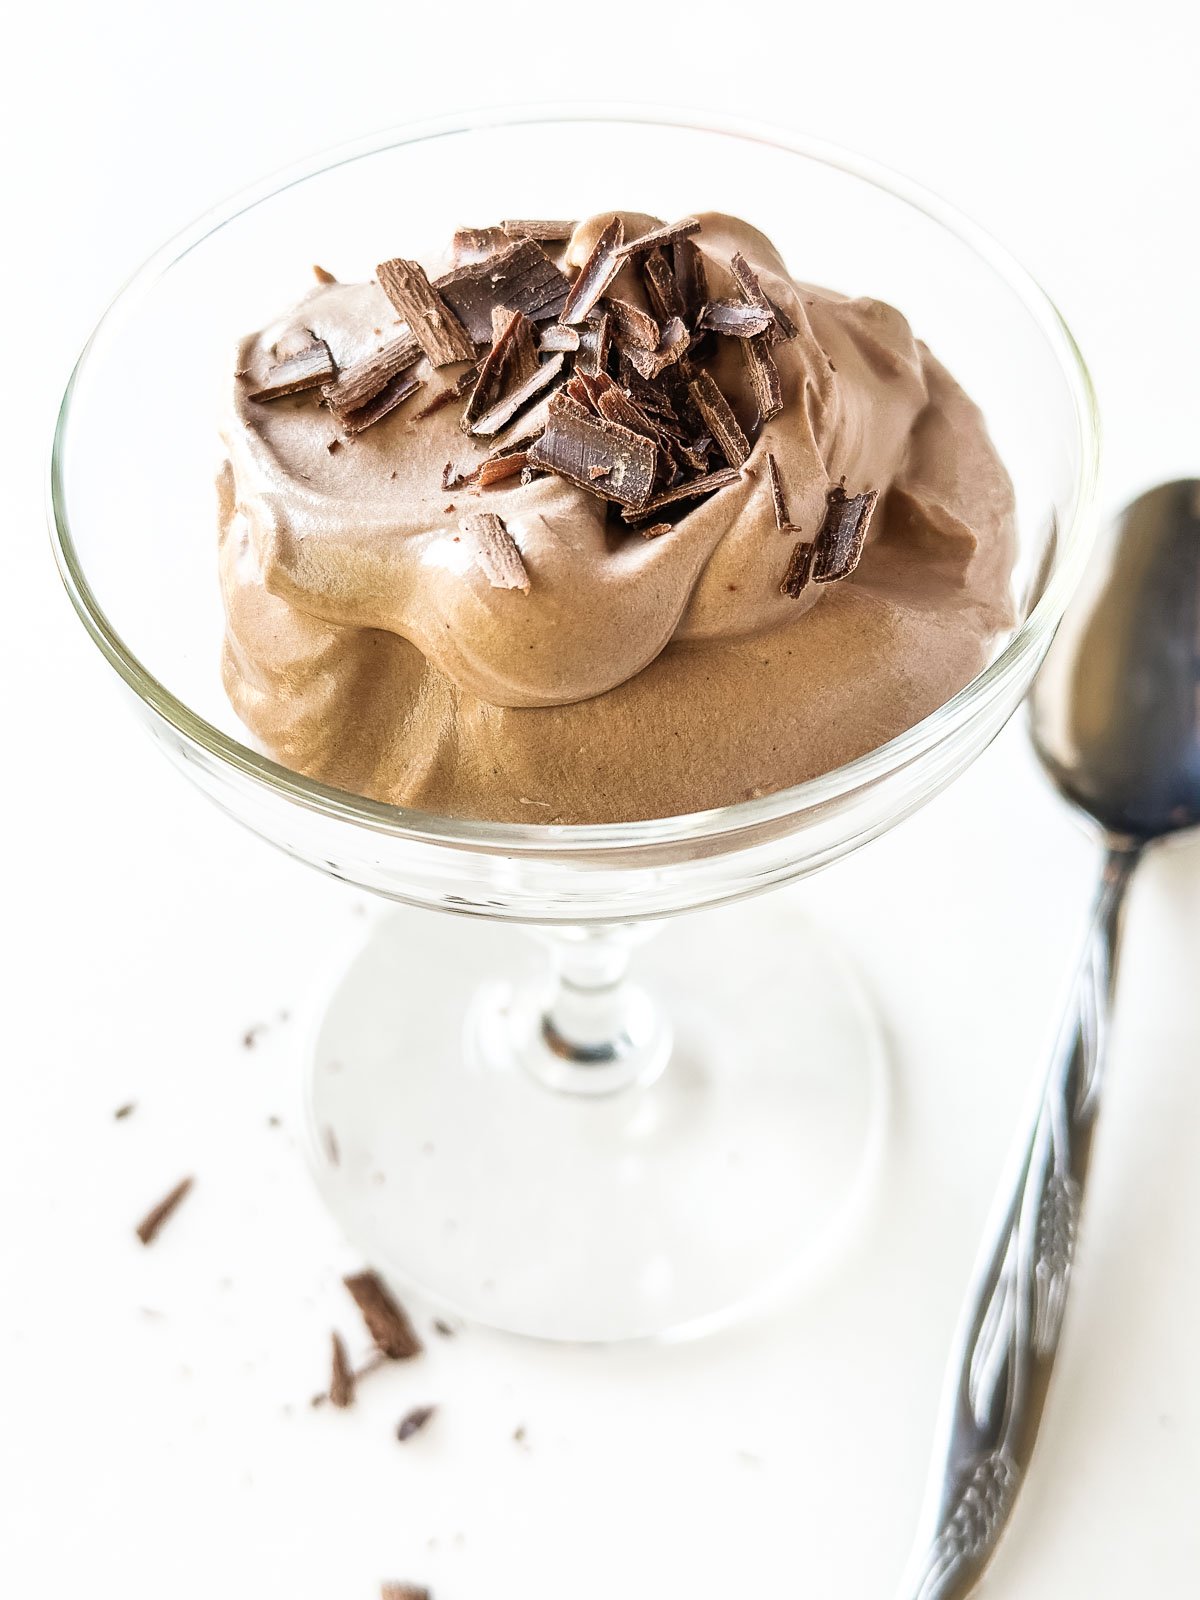 3-minute chocolate mousse in a coupe glass.